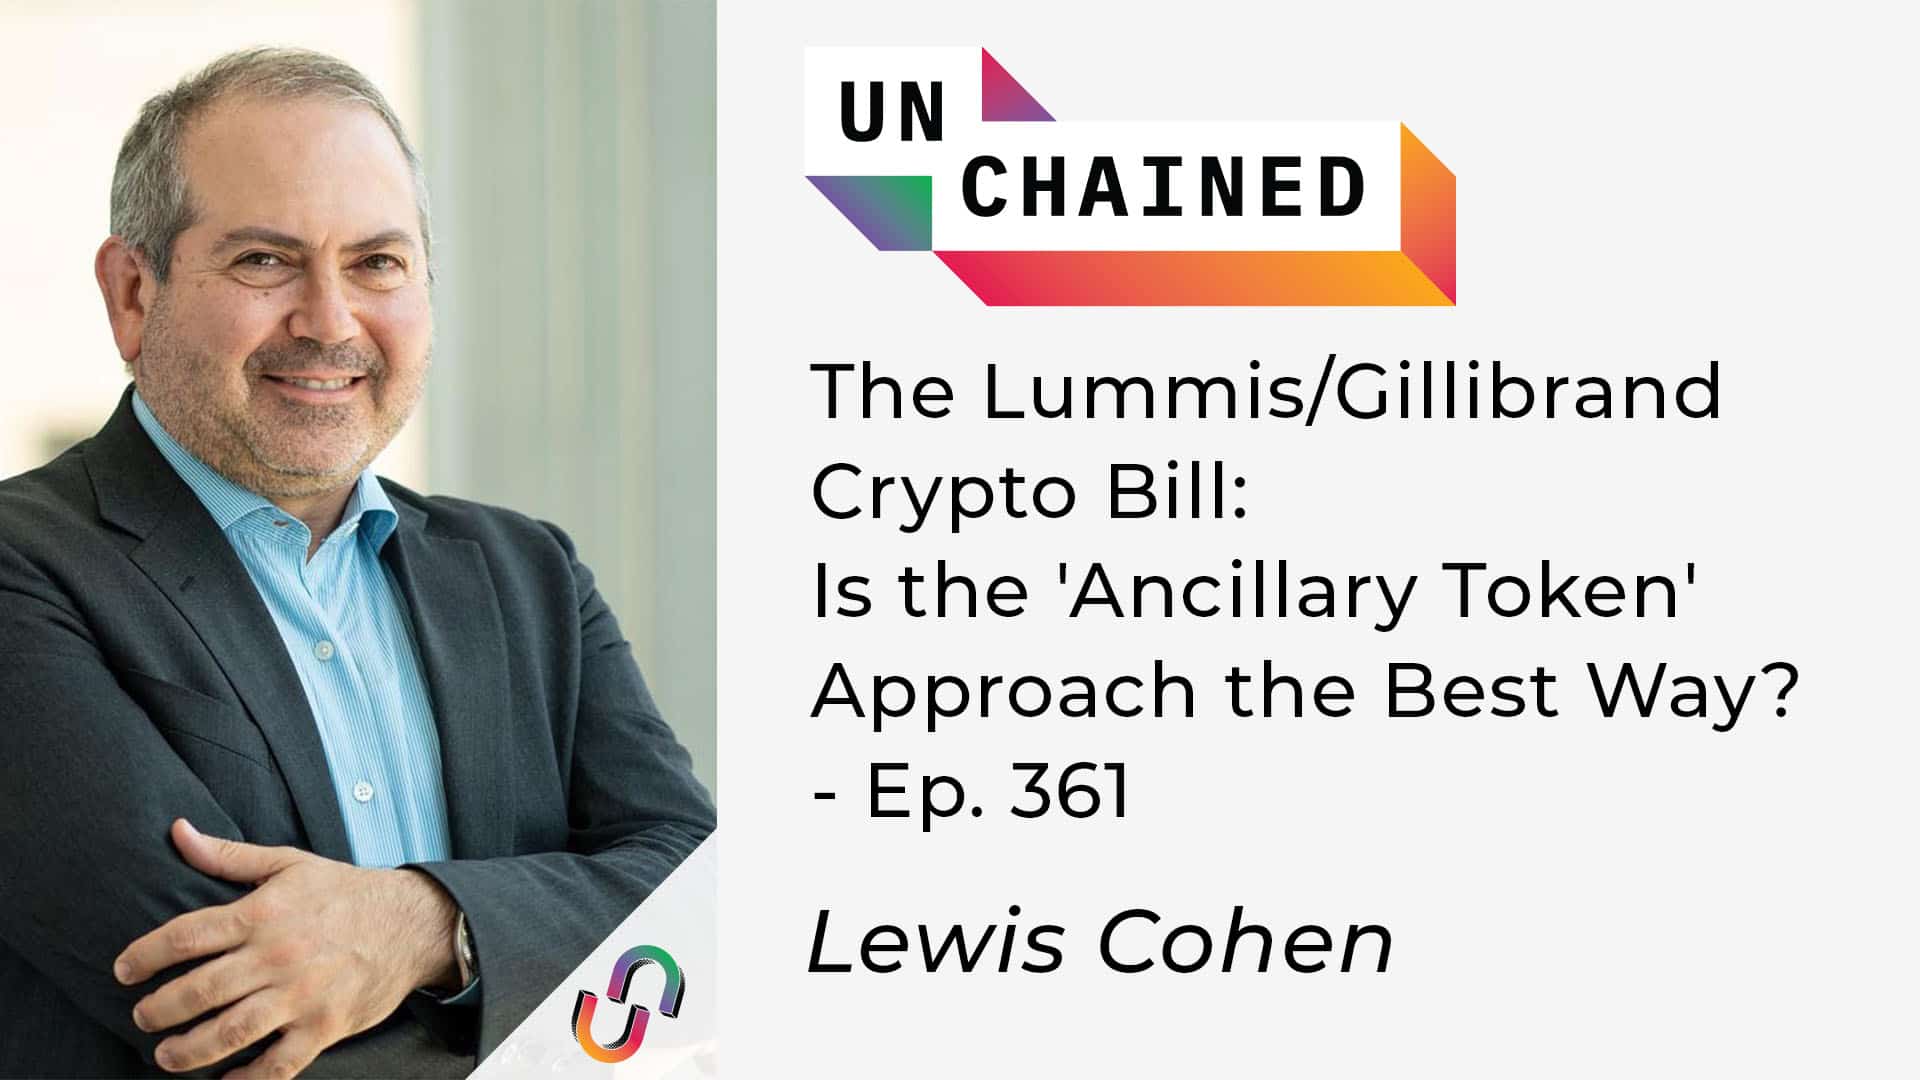 The Lummis/Gillibrand Crypto Bill: Is the 'Ancillary Token' Approach the Best Way? - Ep. 361